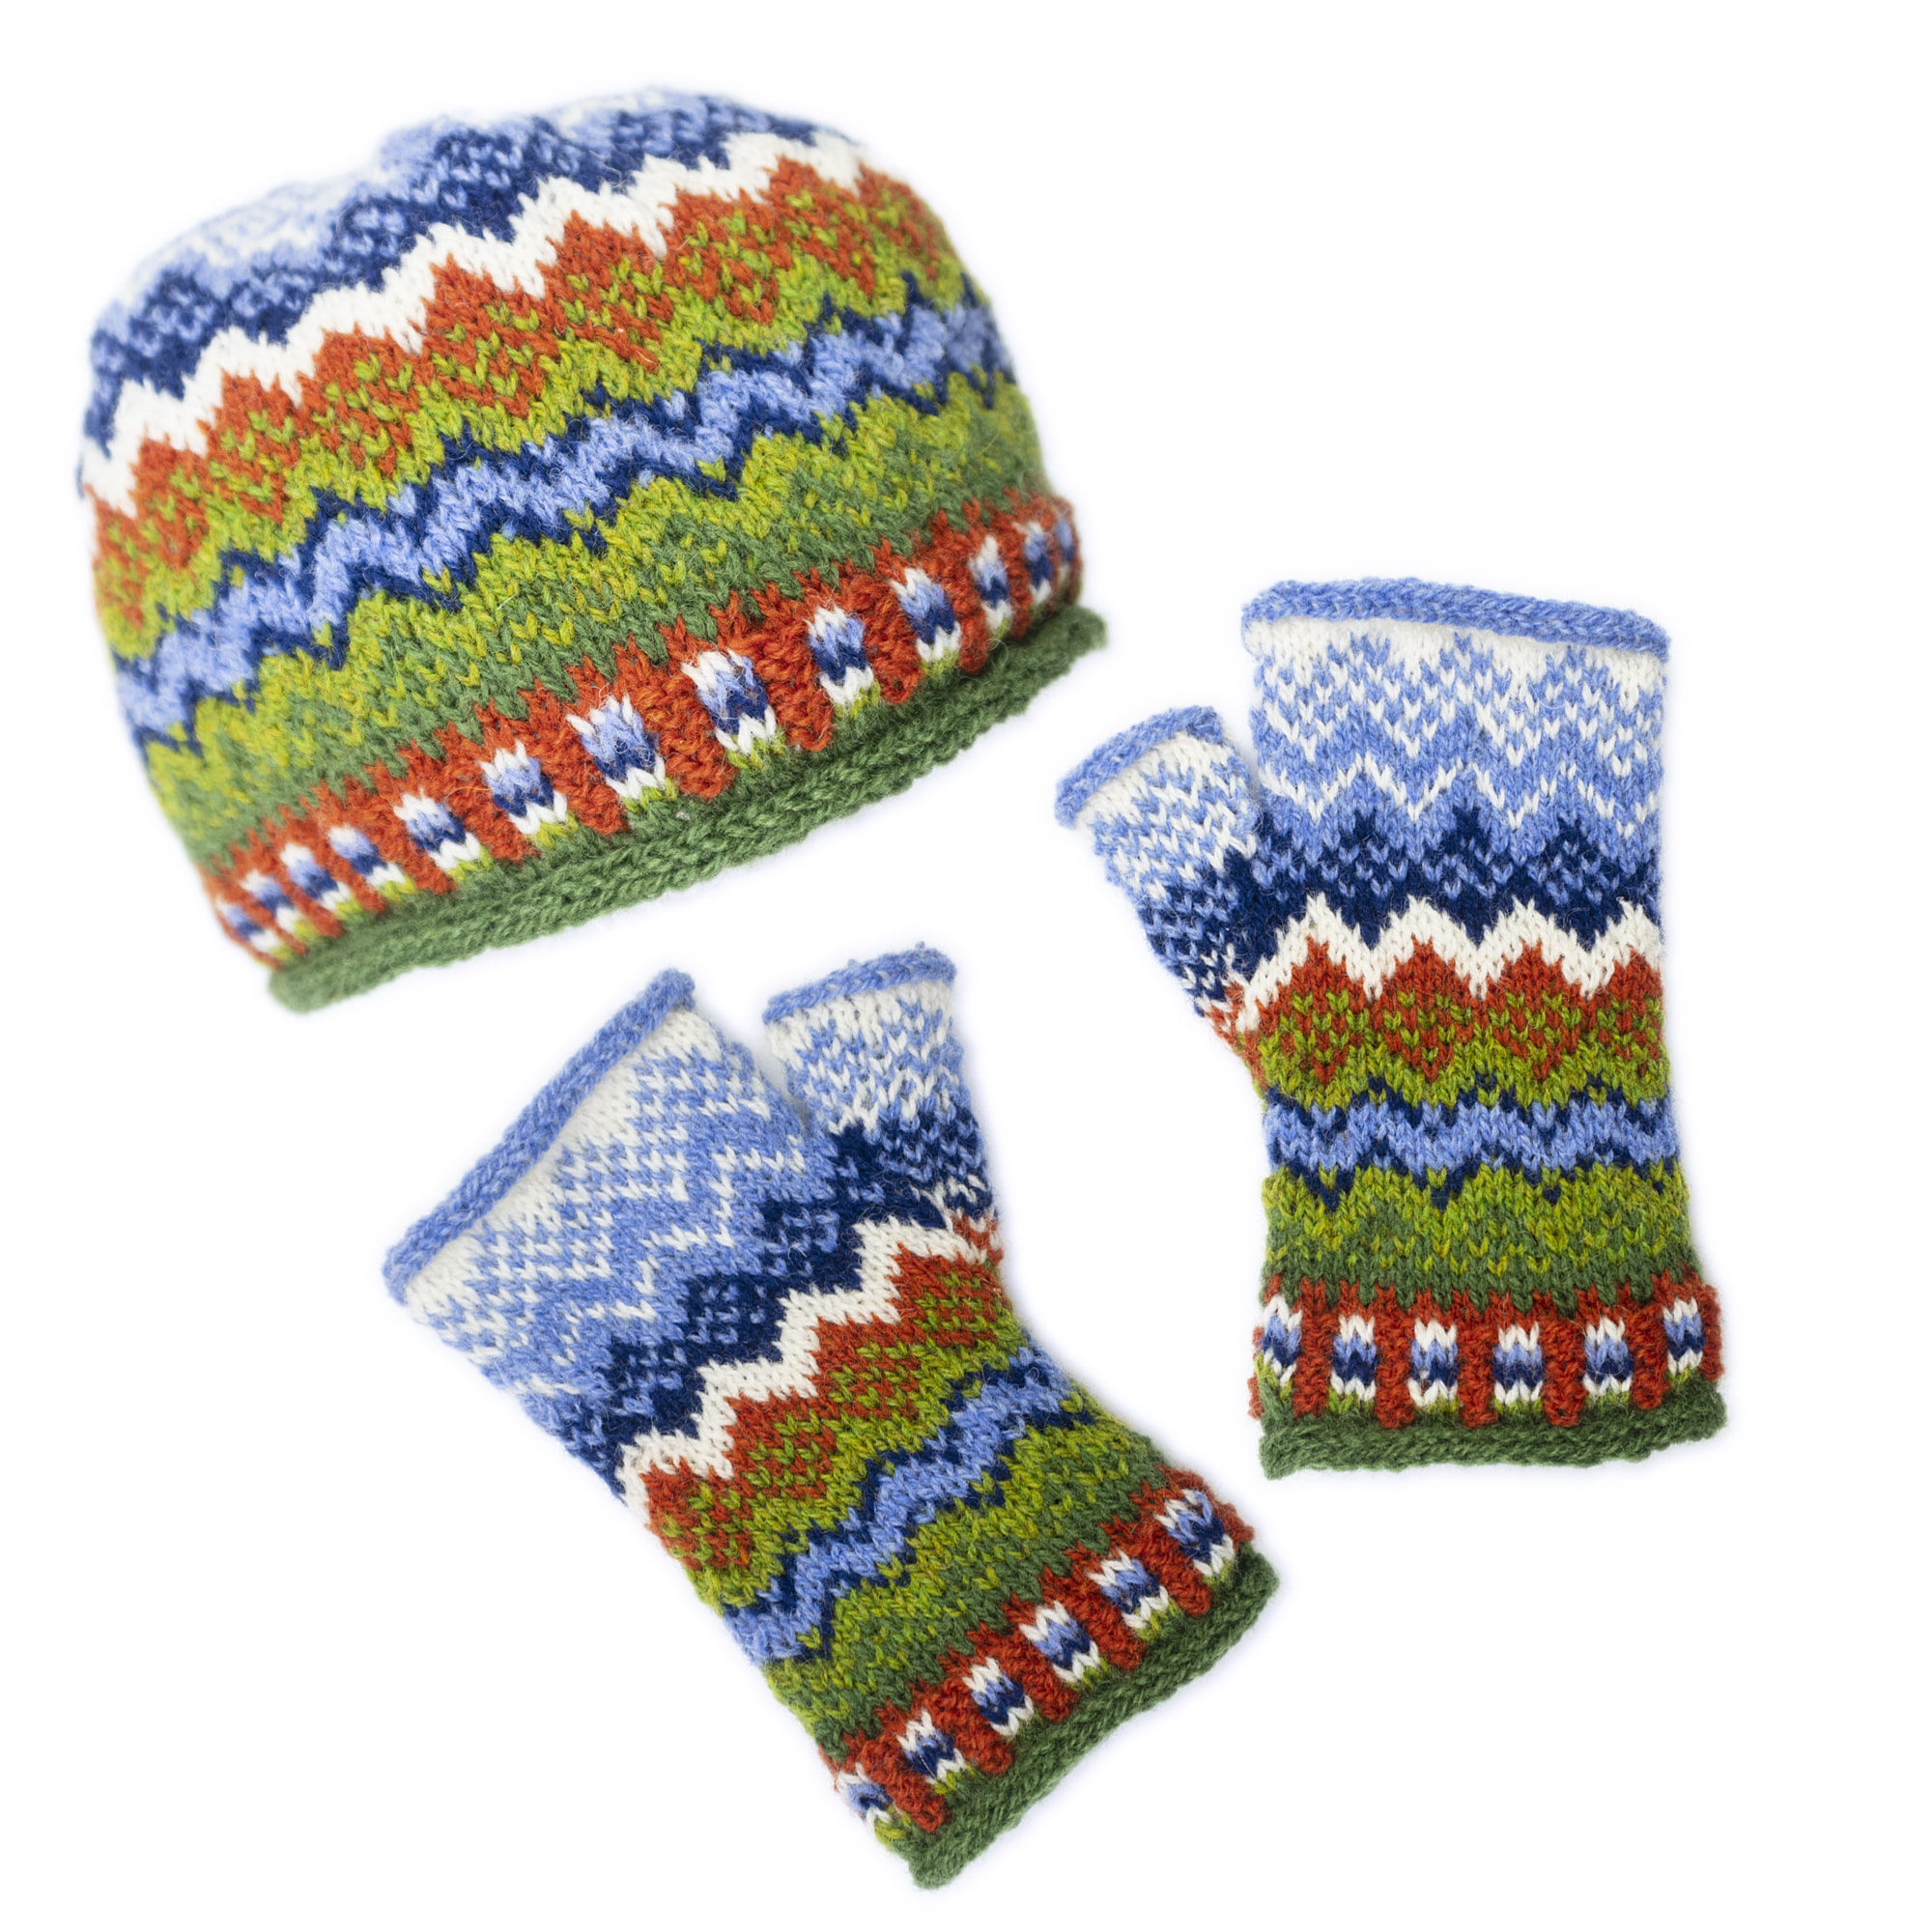 Glen Nevis Hat and Mitts kits | The Caledonian Wool Co.